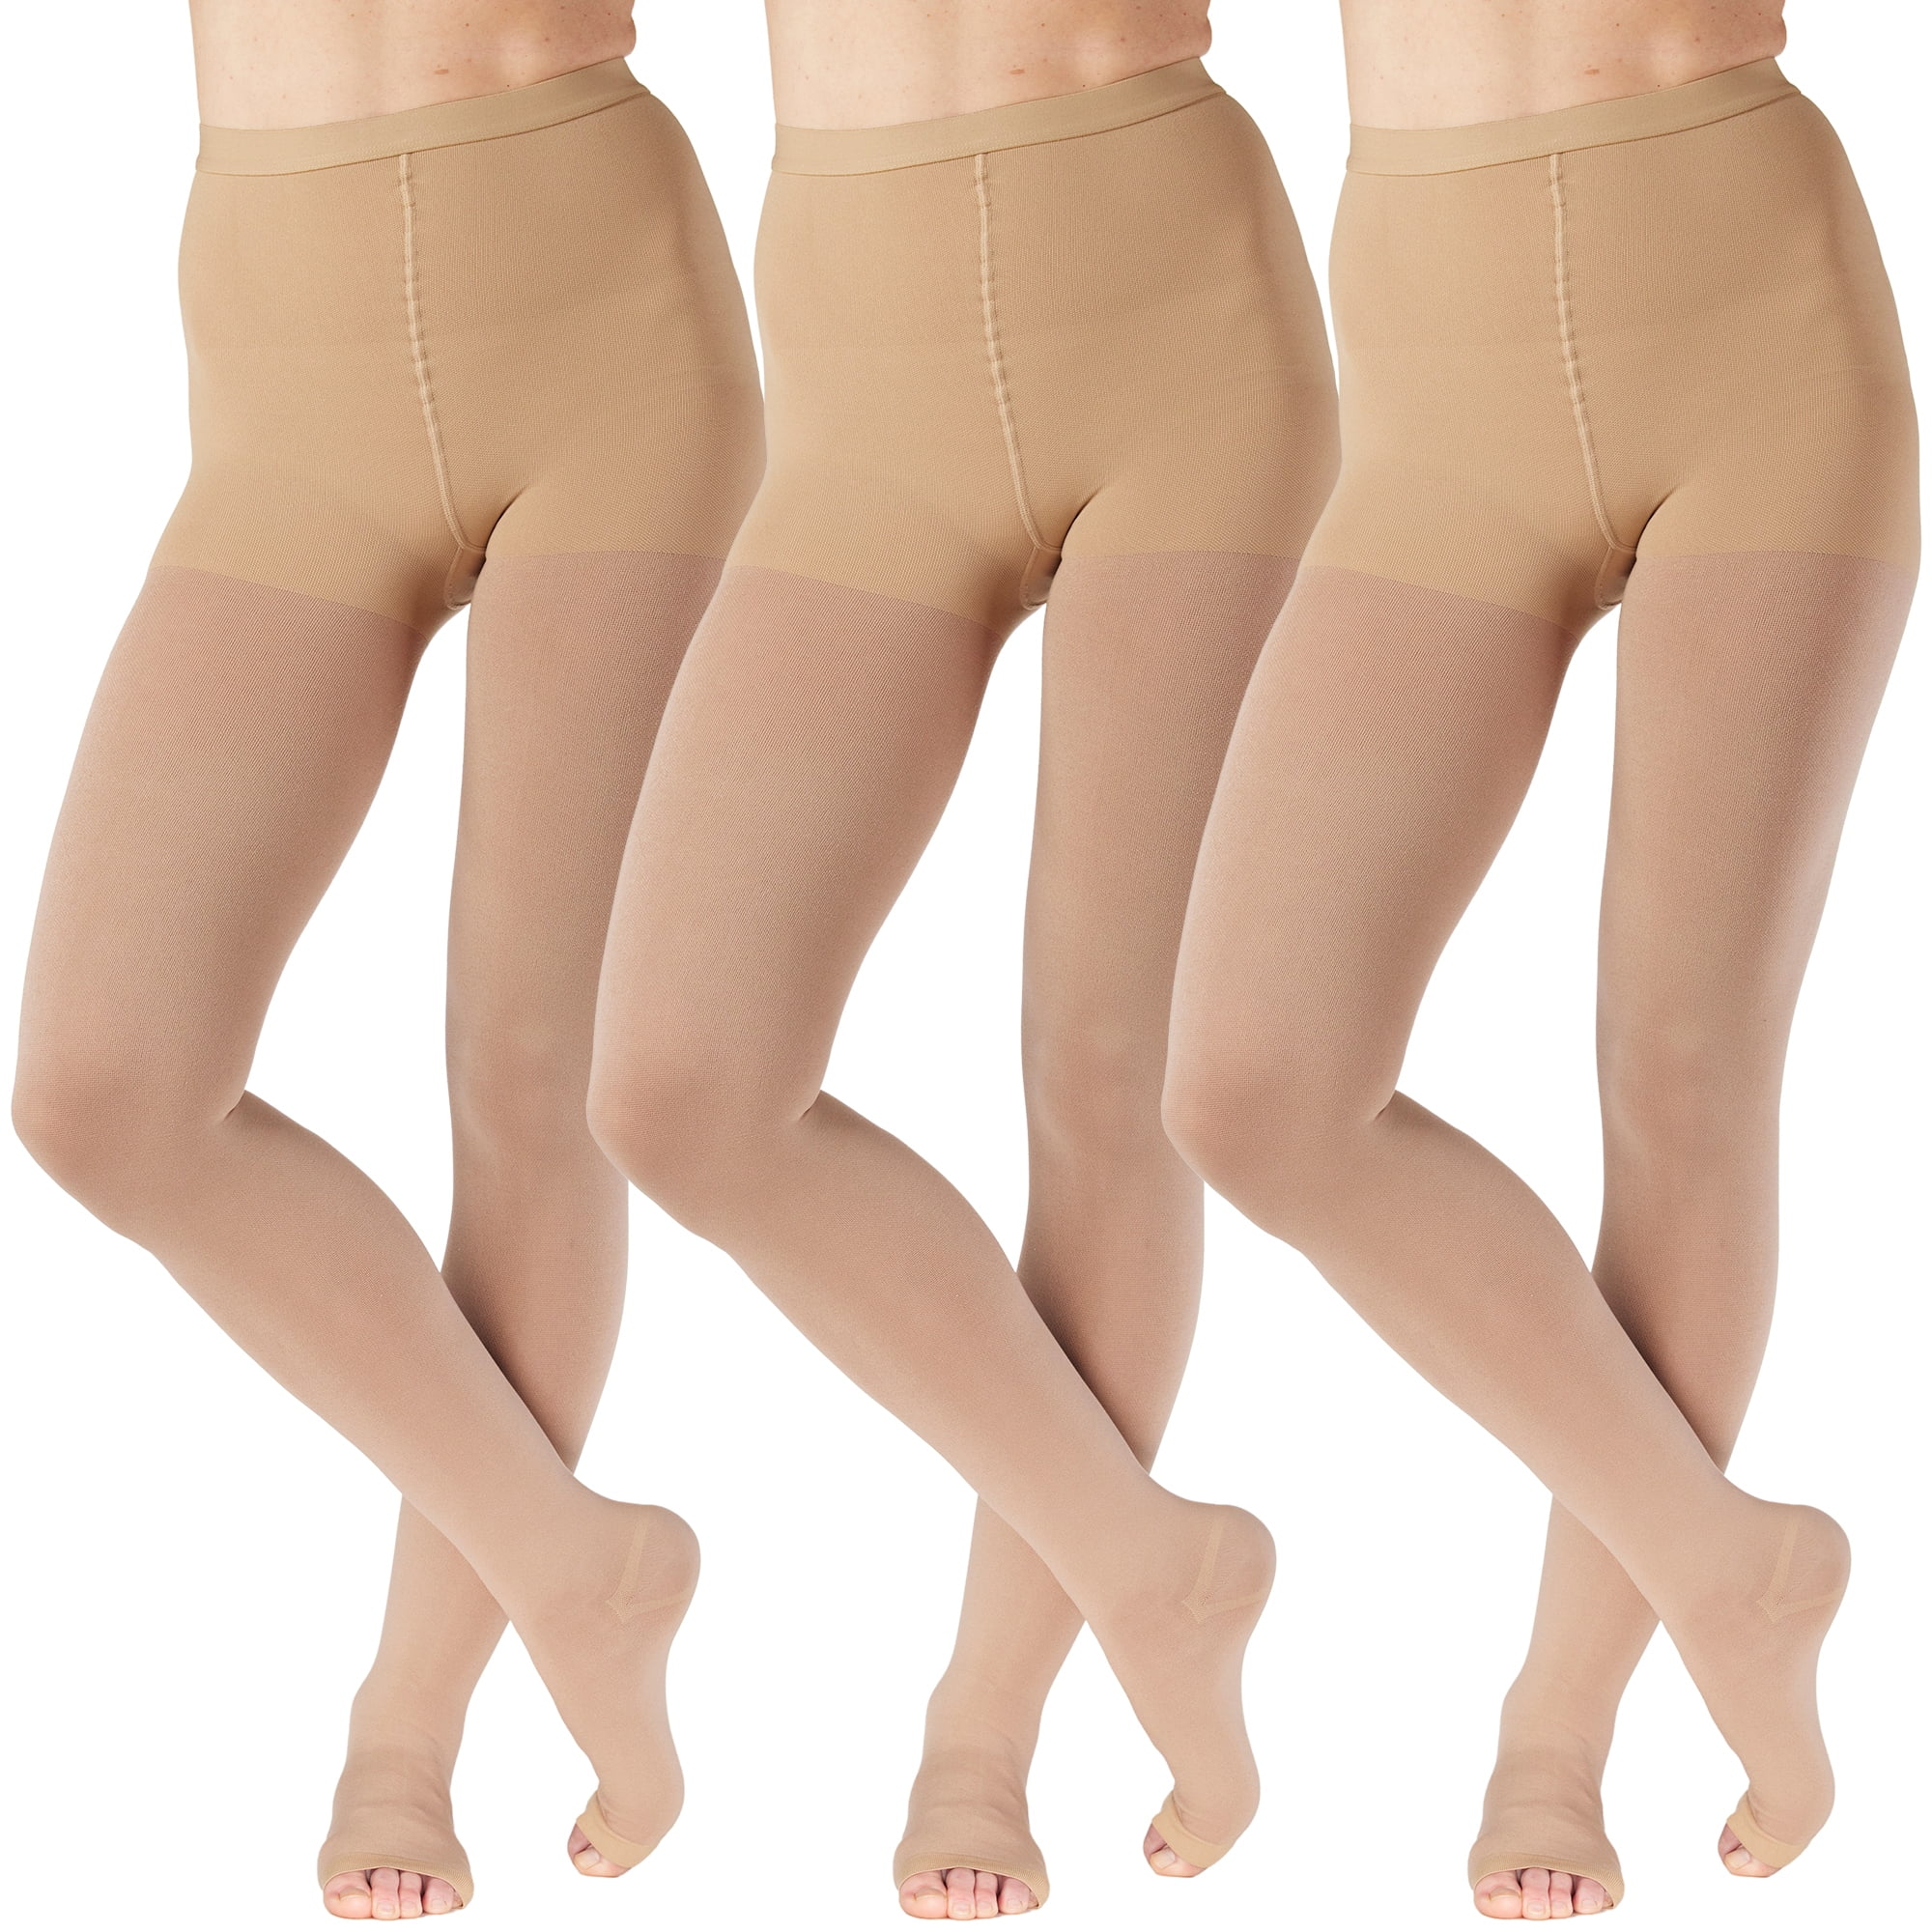 Plus Size Womens Compression Pantyhose with Open Toe 20-30mmHg - Beige, 6XL  